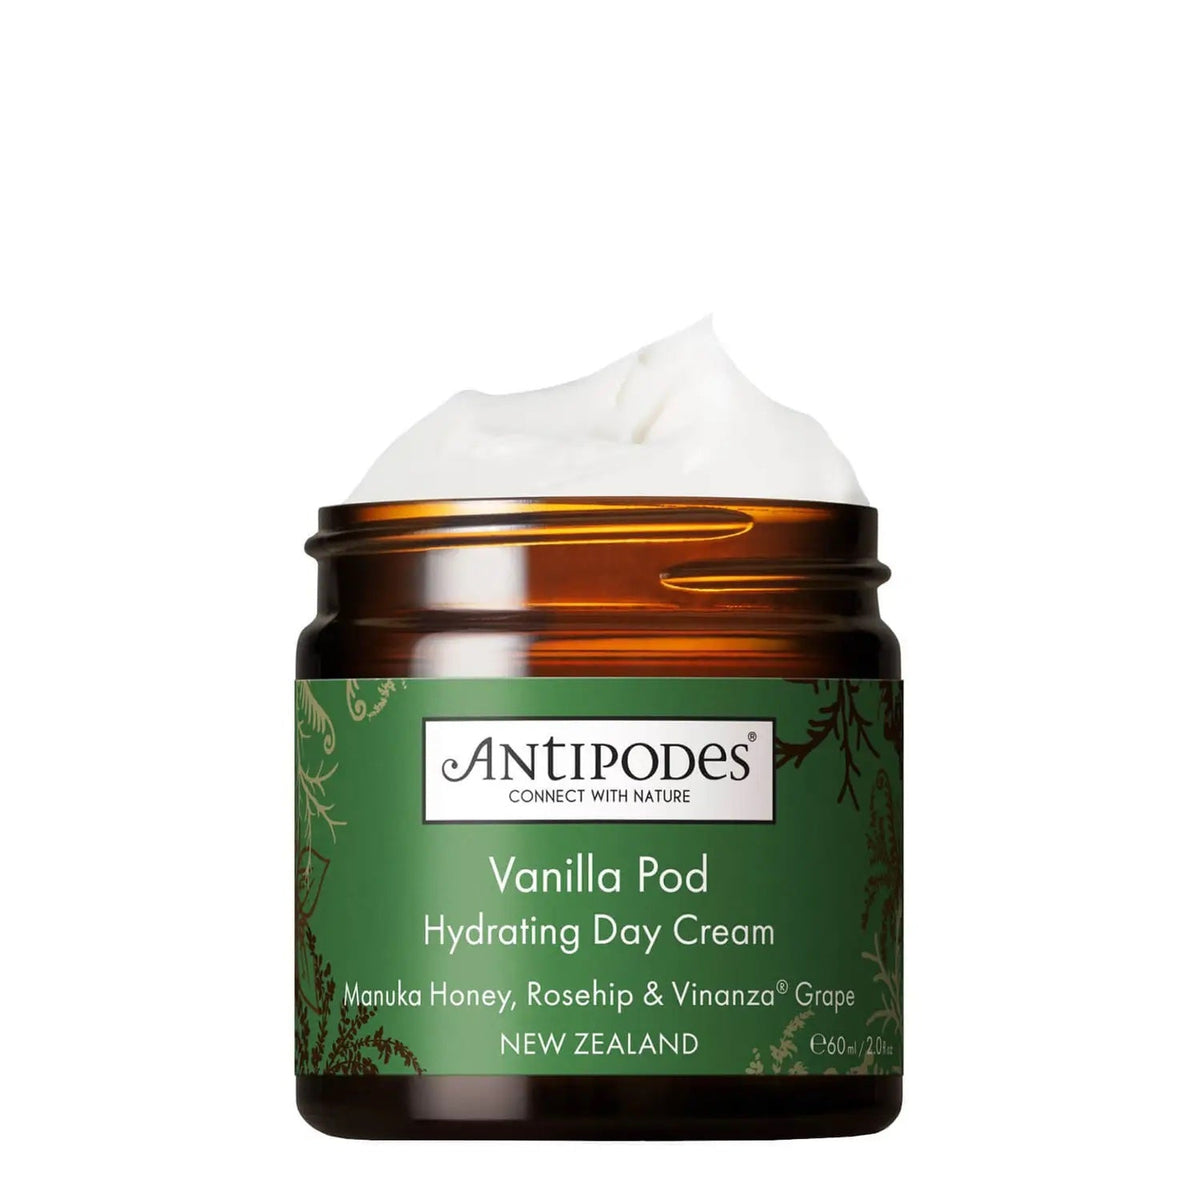 Antipodes Vanilla Pod Hydrating Day Cream - by Antipodes |ProCare Outlet|